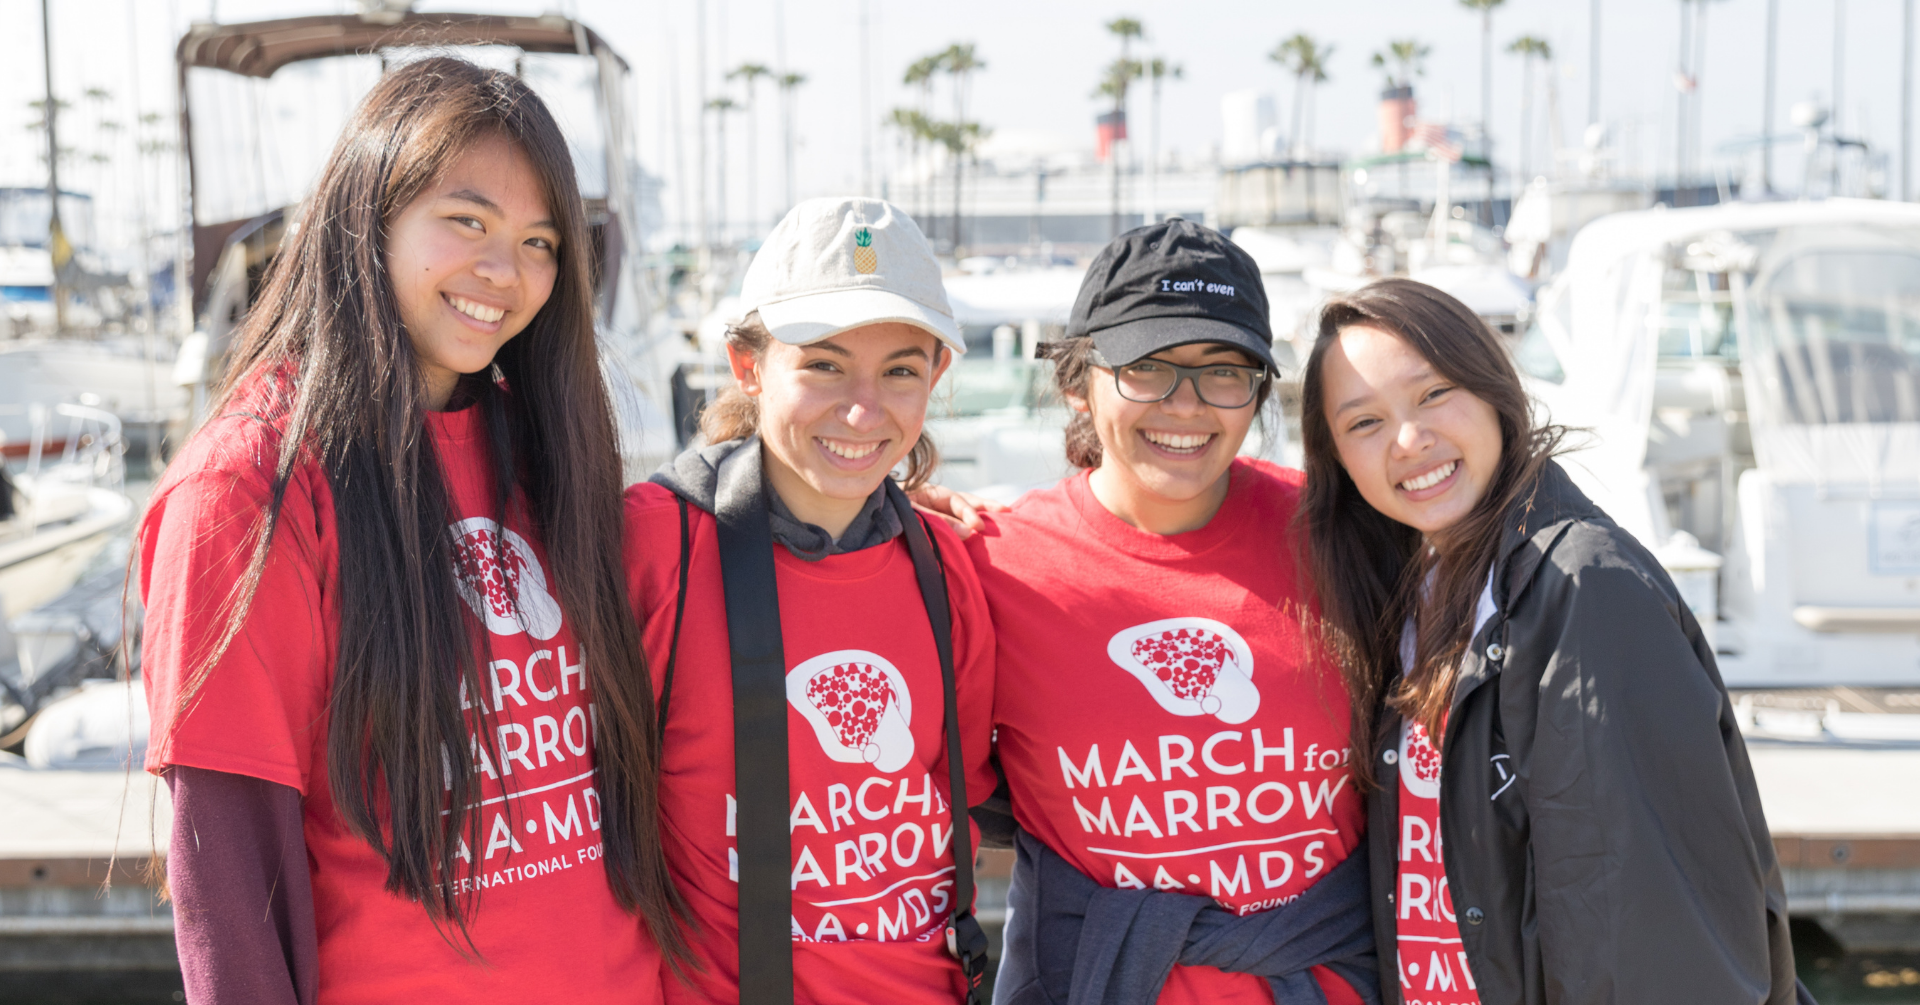 Introductory image: Friends at Los Angeles March for Marrow